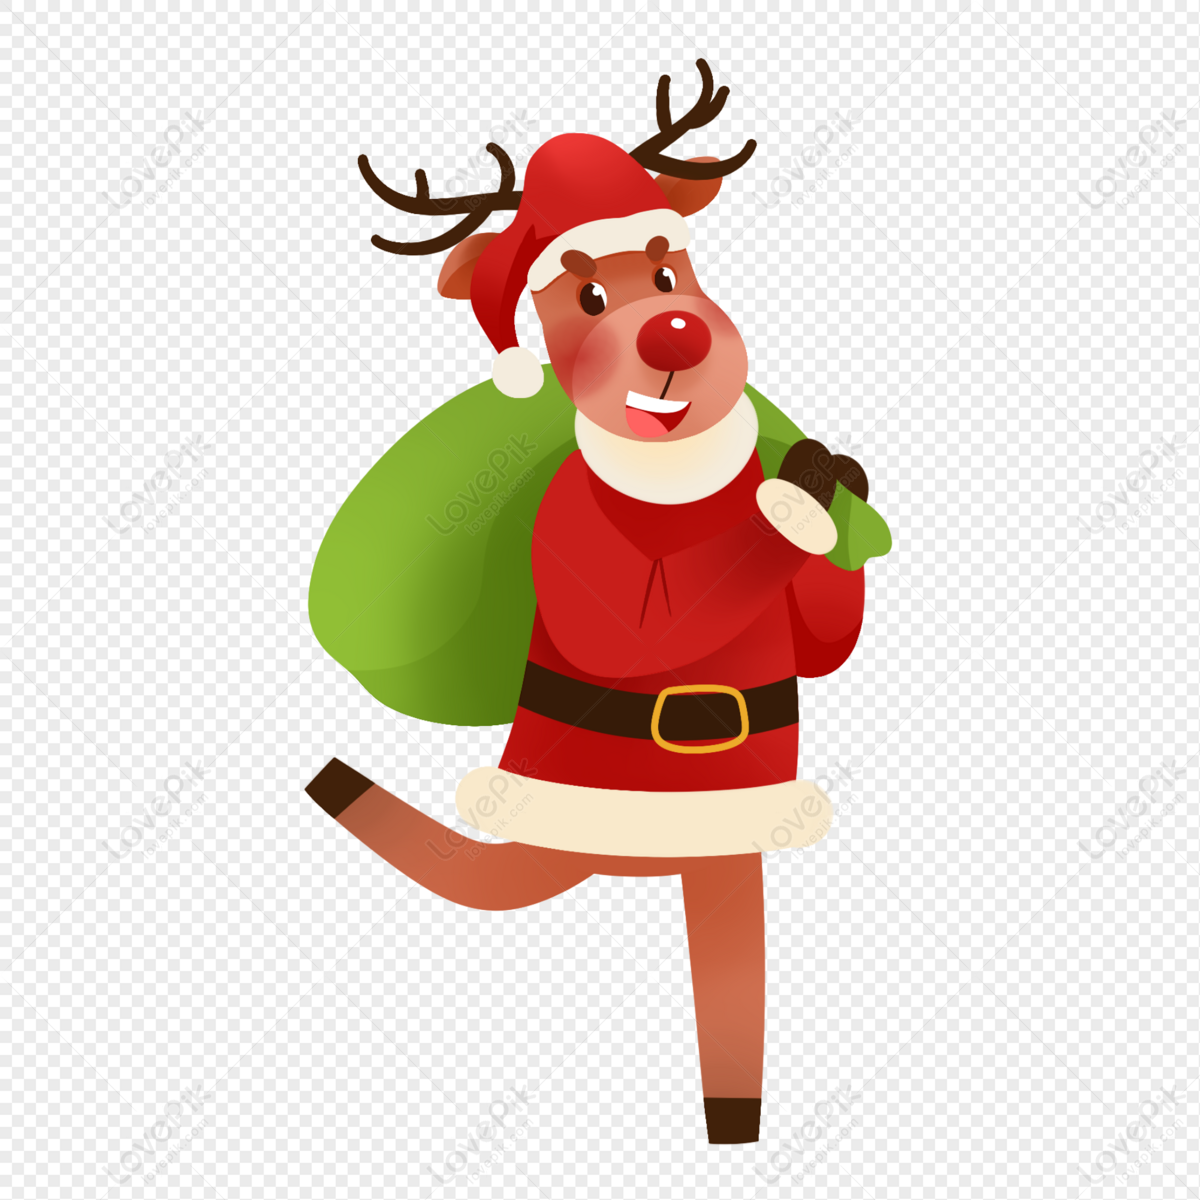 Cartoon Christmas Reindeer PNG Picture And Clipart Image For Free Download  - Lovepik | 401659755